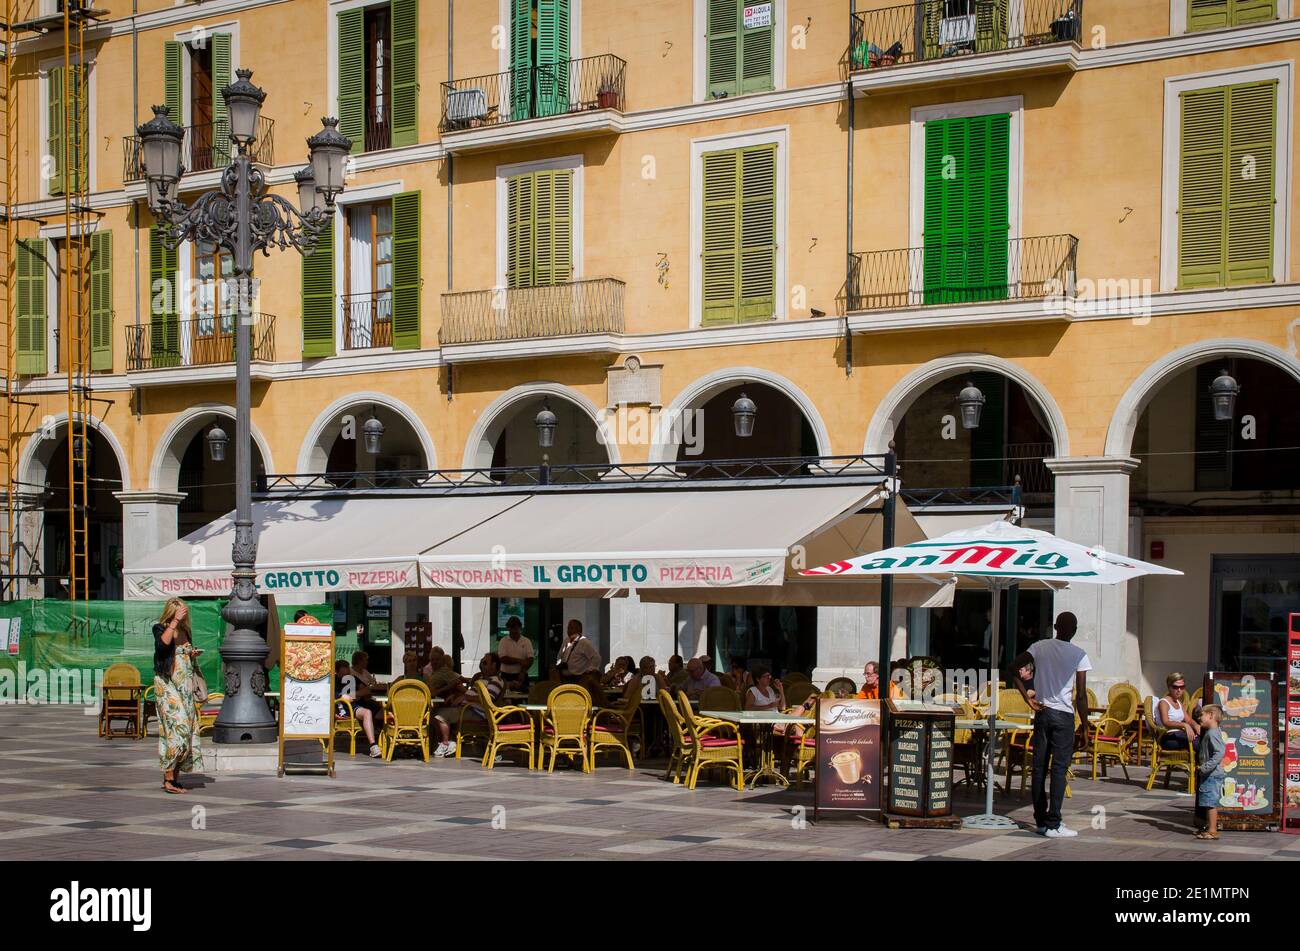 Tables and chairs outside a restaurant in the city of Palma, Mallorca, Balearic Islands, Spain. Stock Photo